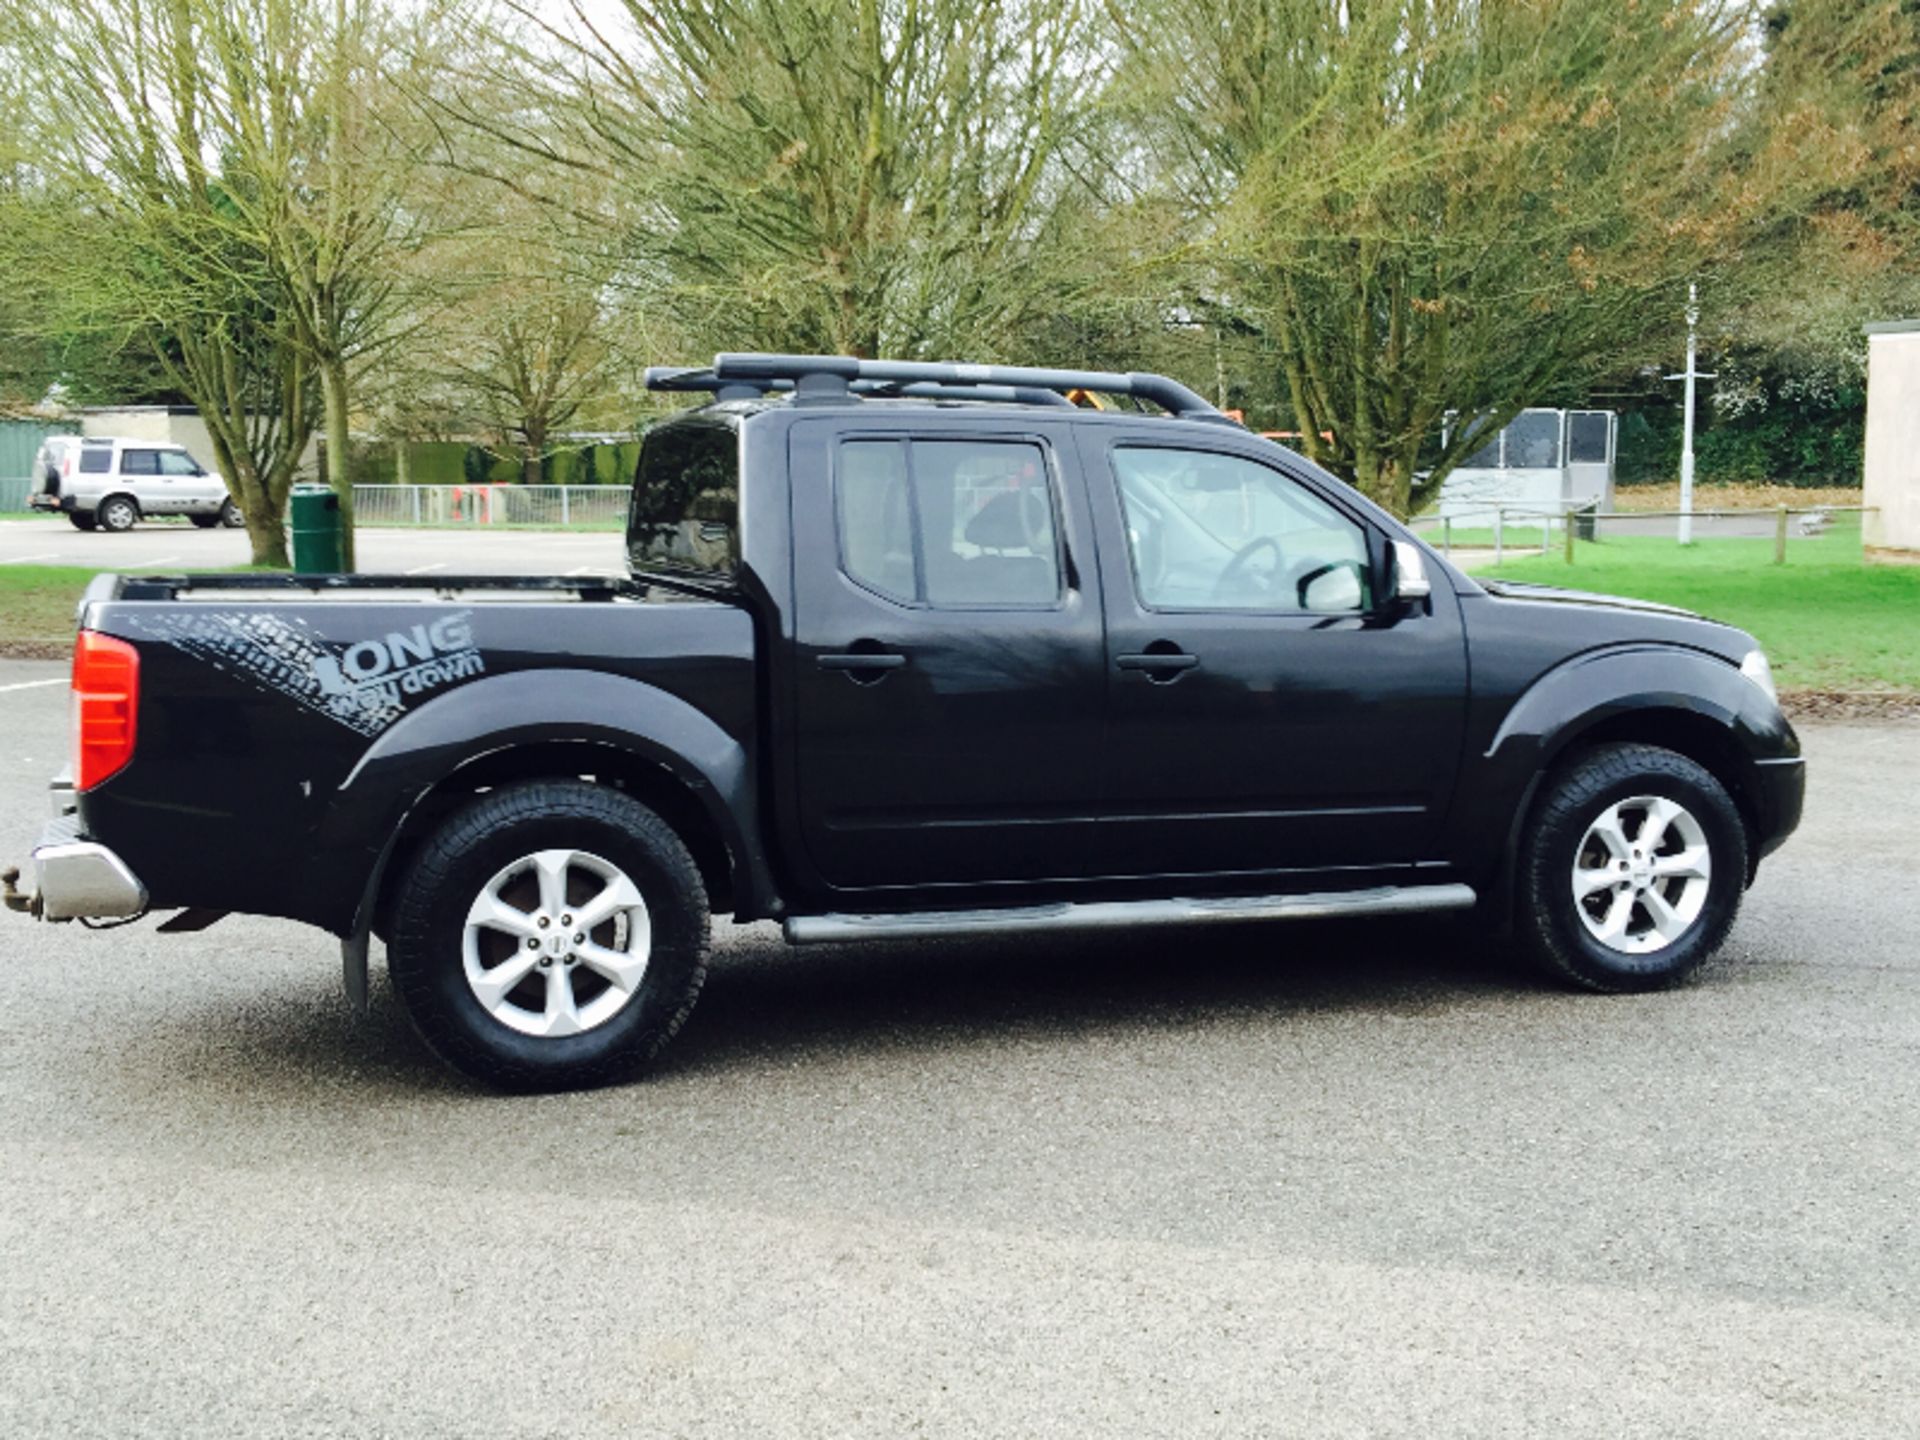 (ON SALE) NISSAN NAVARA 'LONG WAY DOWN' (2009) DOUBLE CAB PICK-UP "BLACK EDITION" 2.5 DCI  (NO VAT) - Image 4 of 15